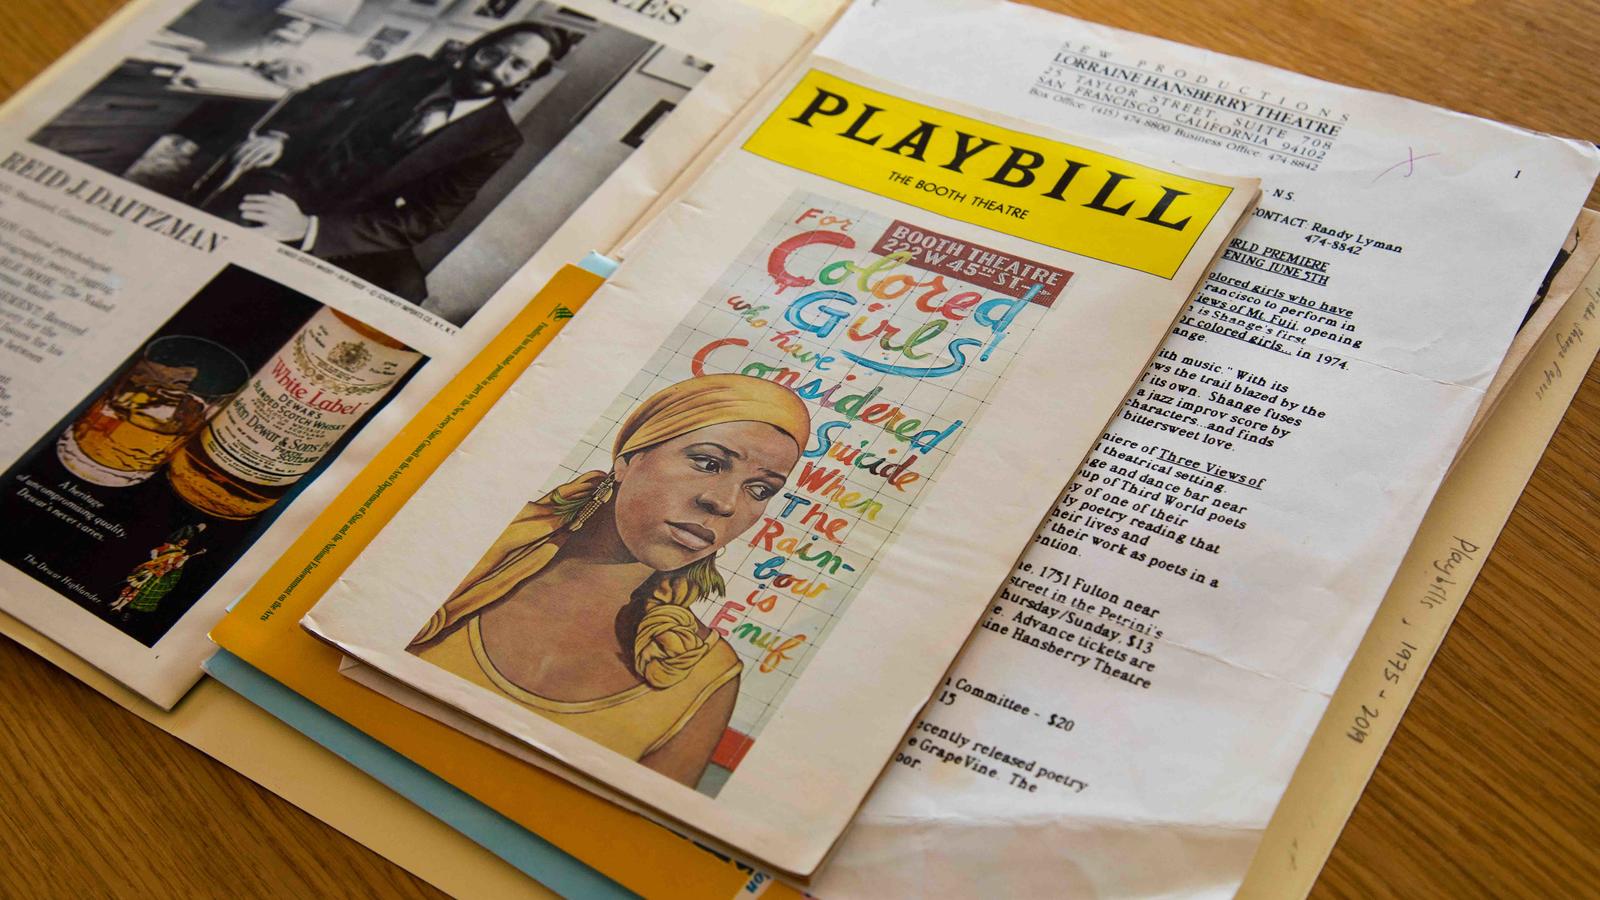 Playbill from "for colored girls" among other archival materials from the Shange Papers